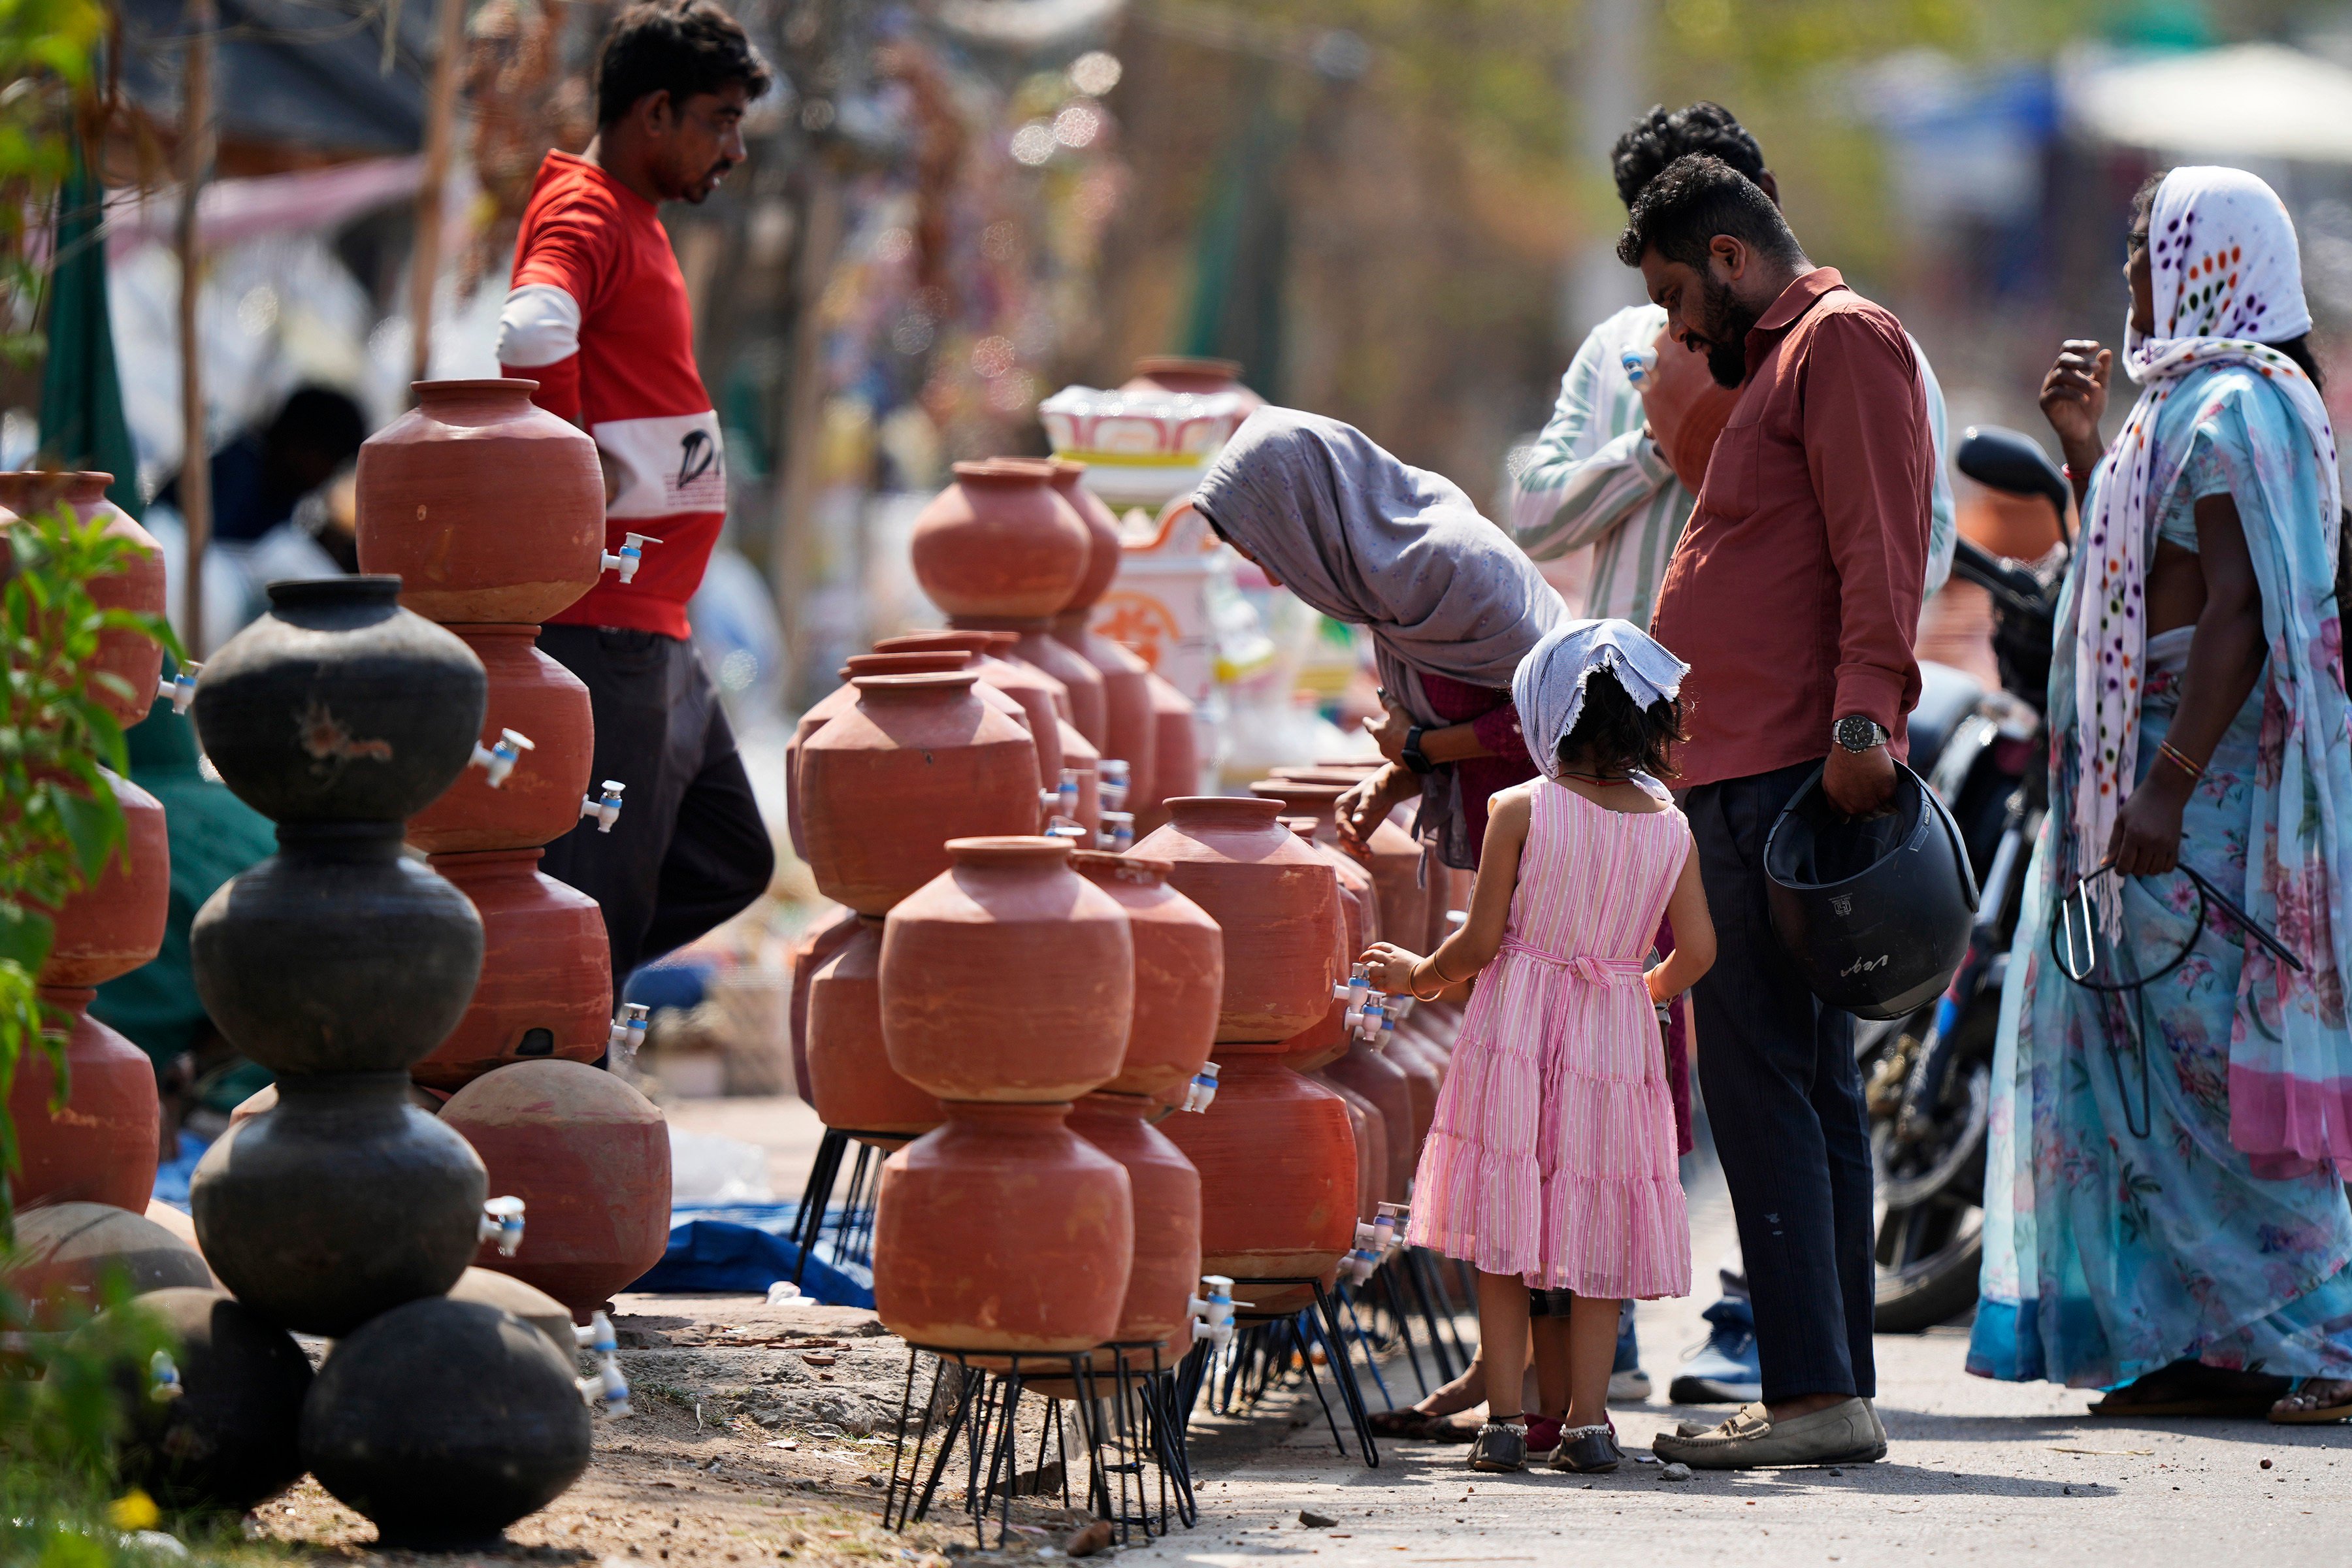 People shop for earthen water vessels, known locally as poor man’s refrigerator, from a roadside vendor in Hyderabad, India, on May 2. Photo: AP